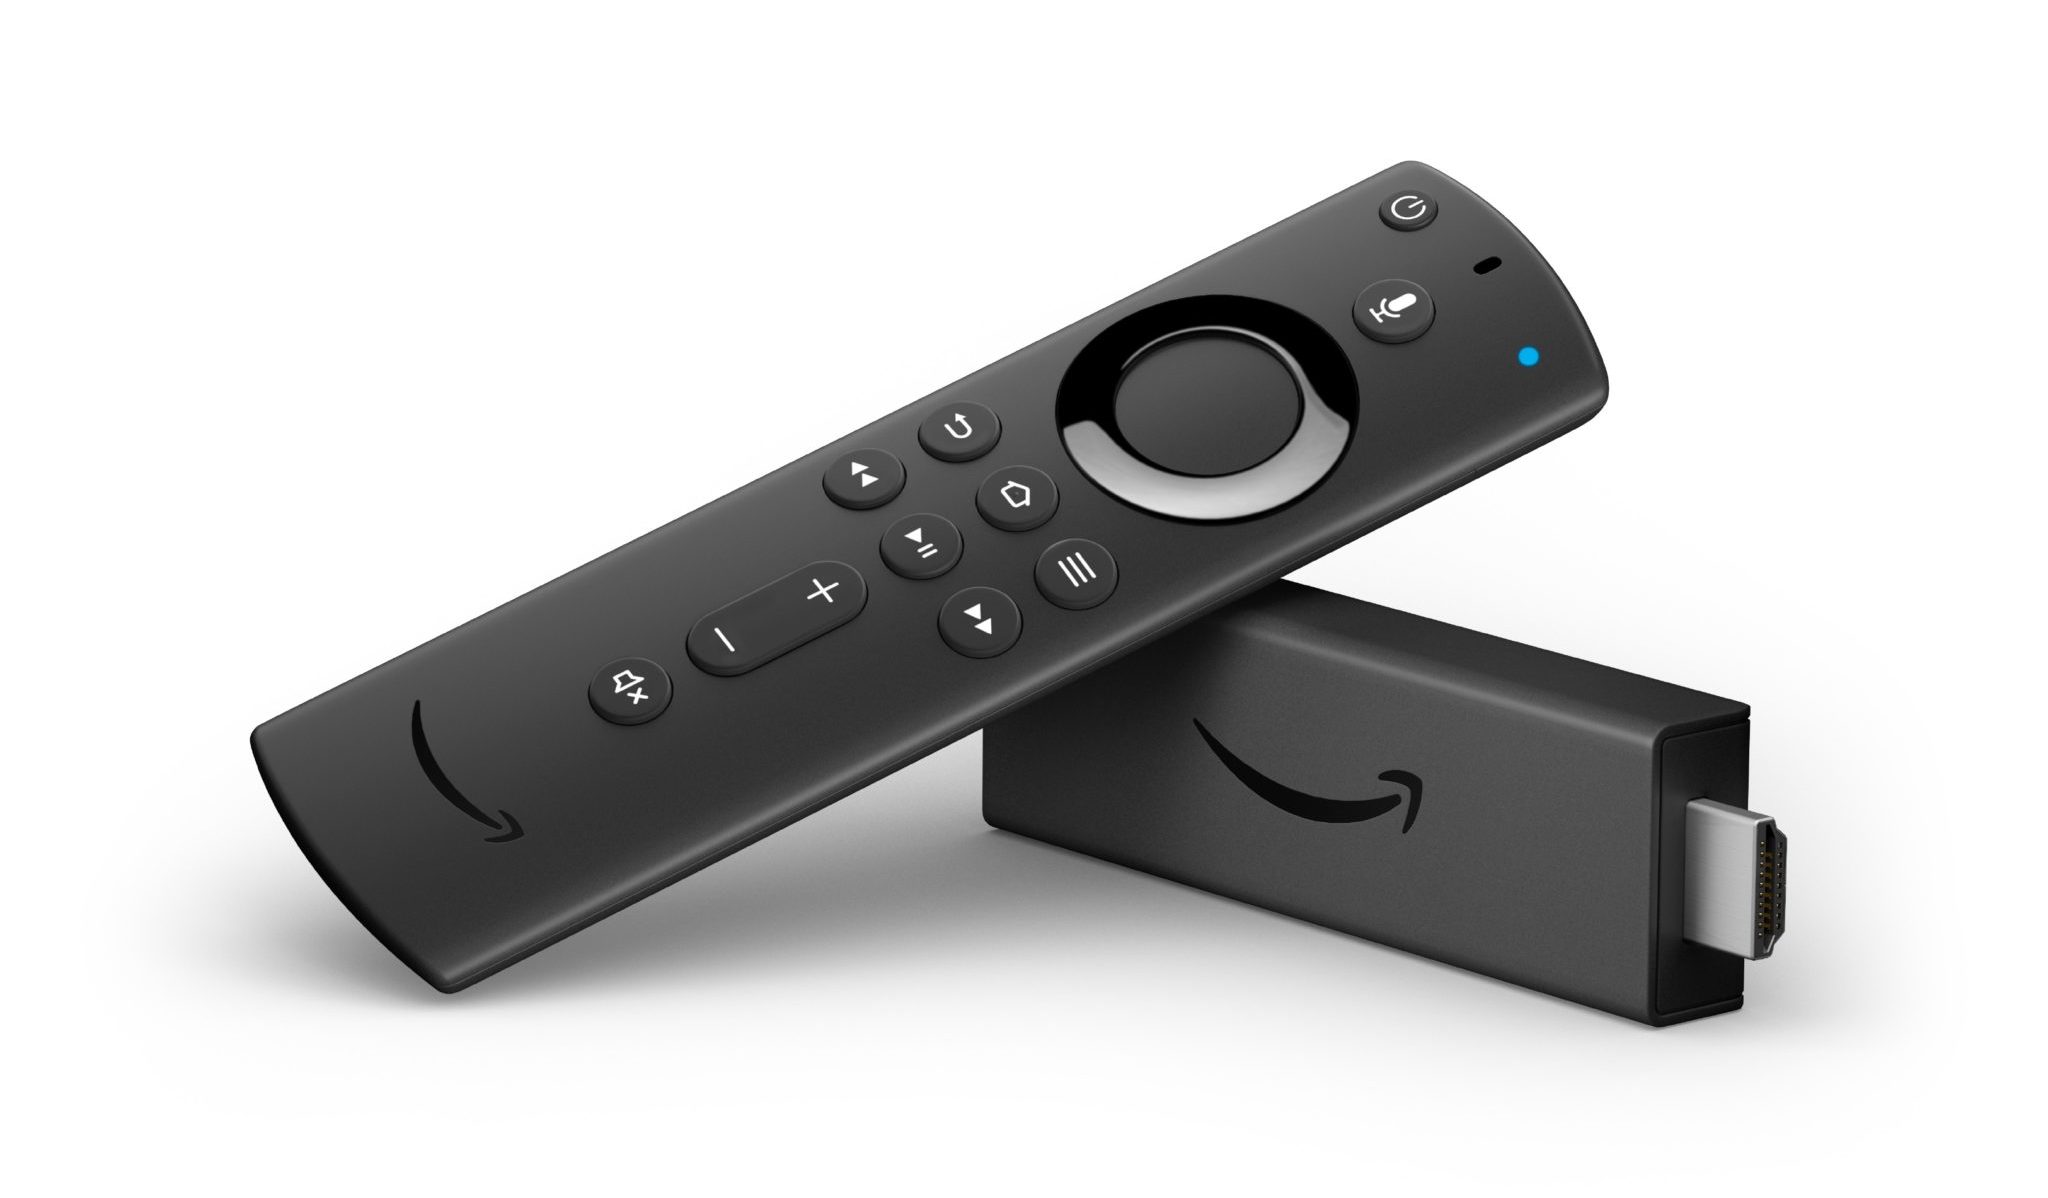 EXPIRED: Amazon’s Fire TV Stick 4K & Fire TV Cube Are on Sale